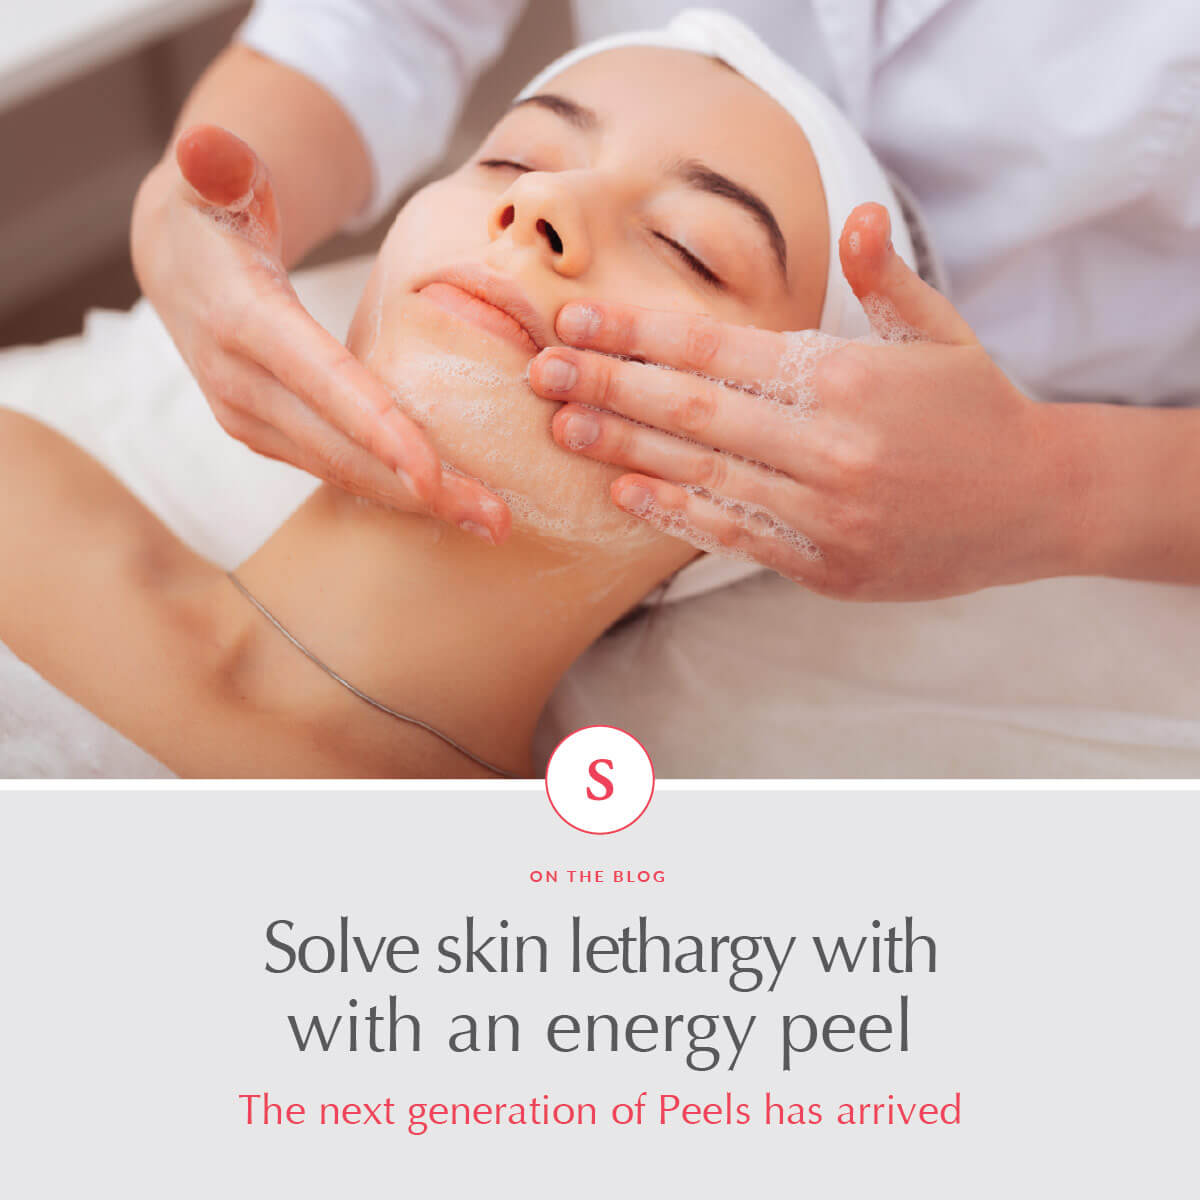 Solve skin lethargy with an energy peel